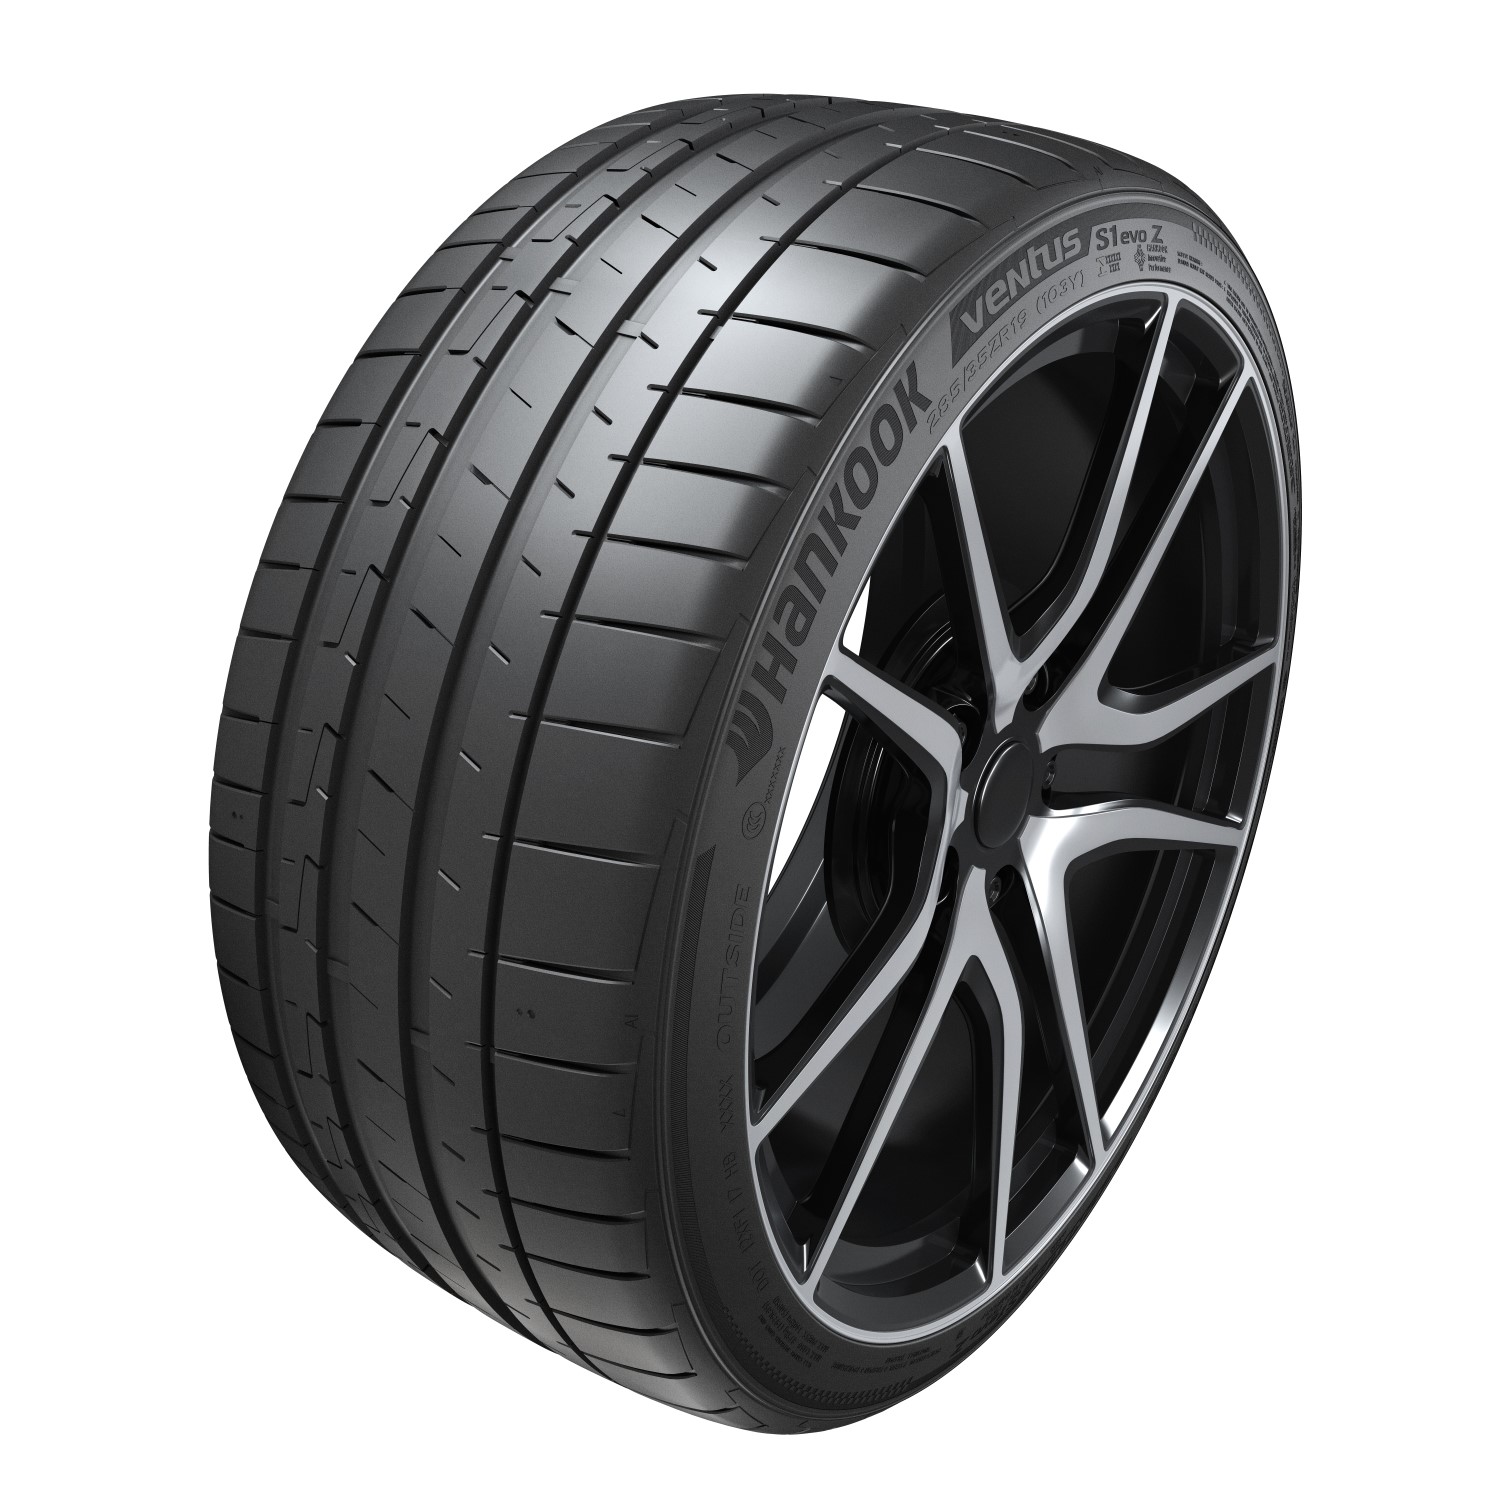 Hankook Ventus S1 Evo Z K129 - Tyre Reviews and Tests